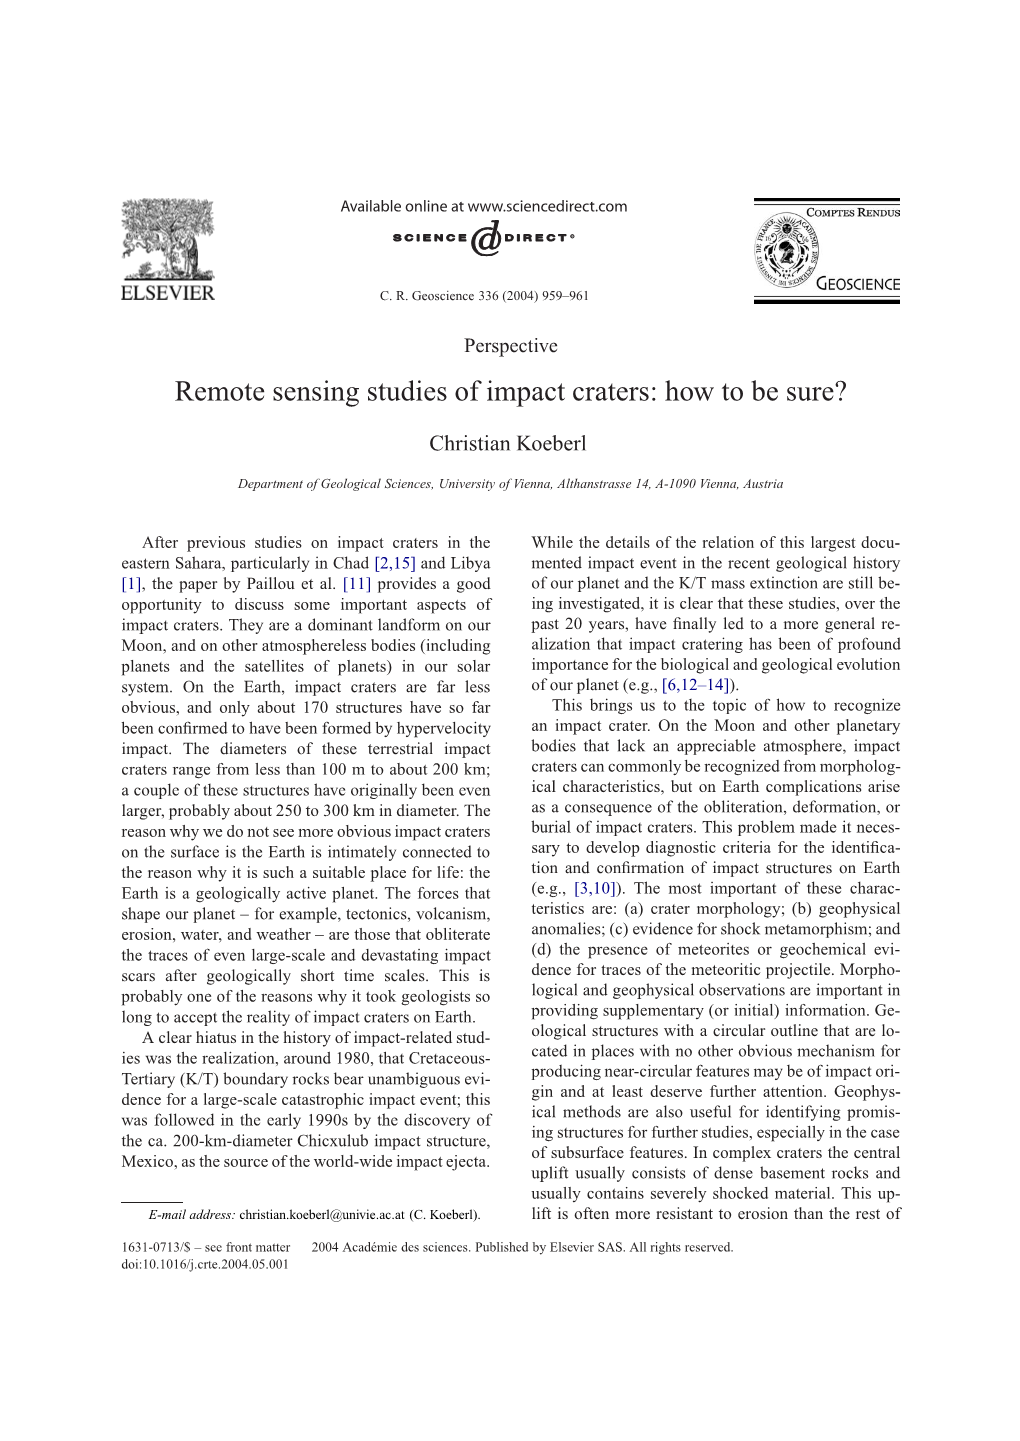 Remote Sensing Studies of Impact Craters: How to Be Sure?